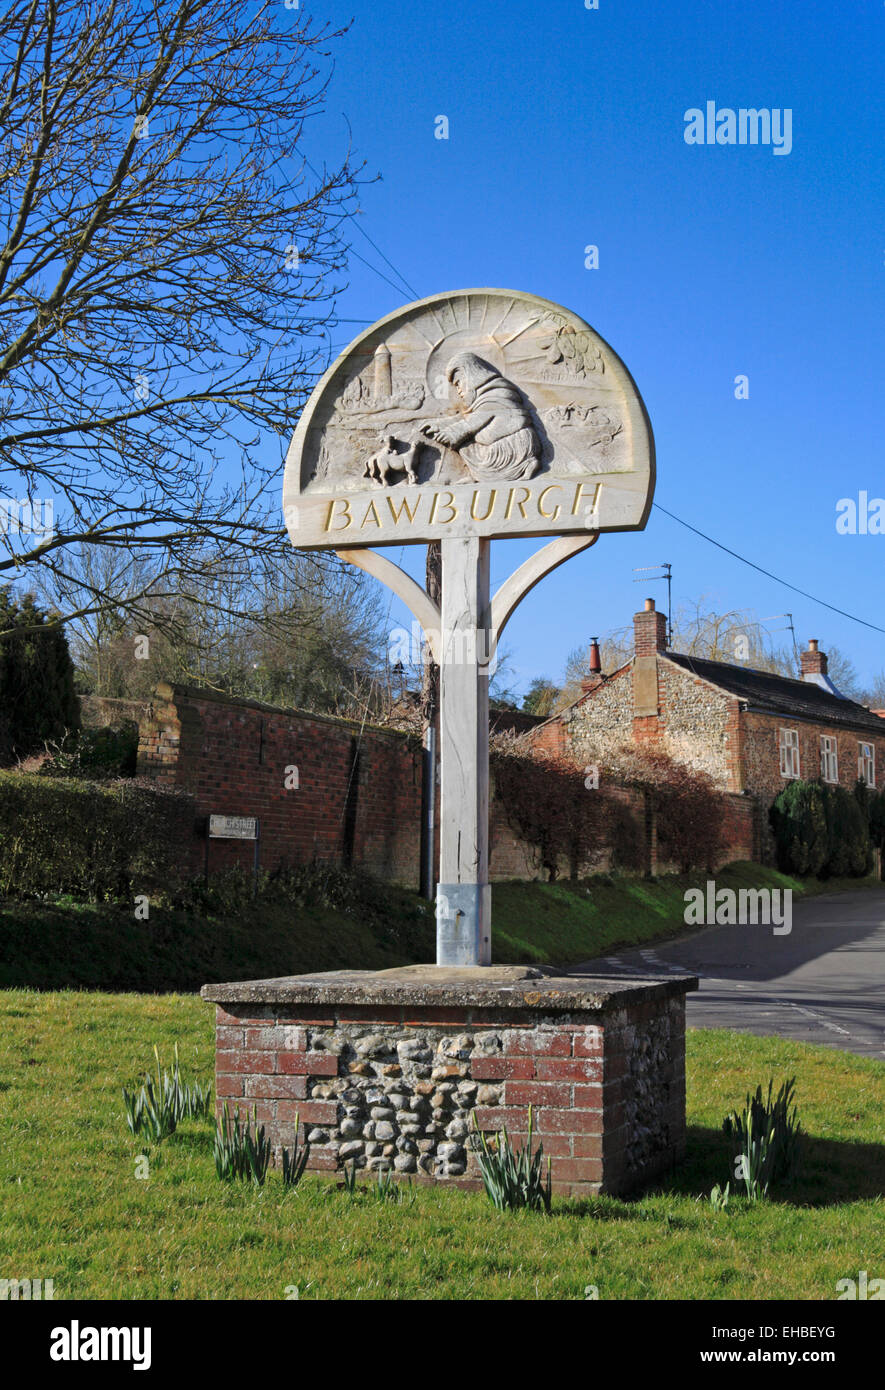 A view of the village sign of Bawburgh, Norfolk, England, United Kingdom. Stock Photo